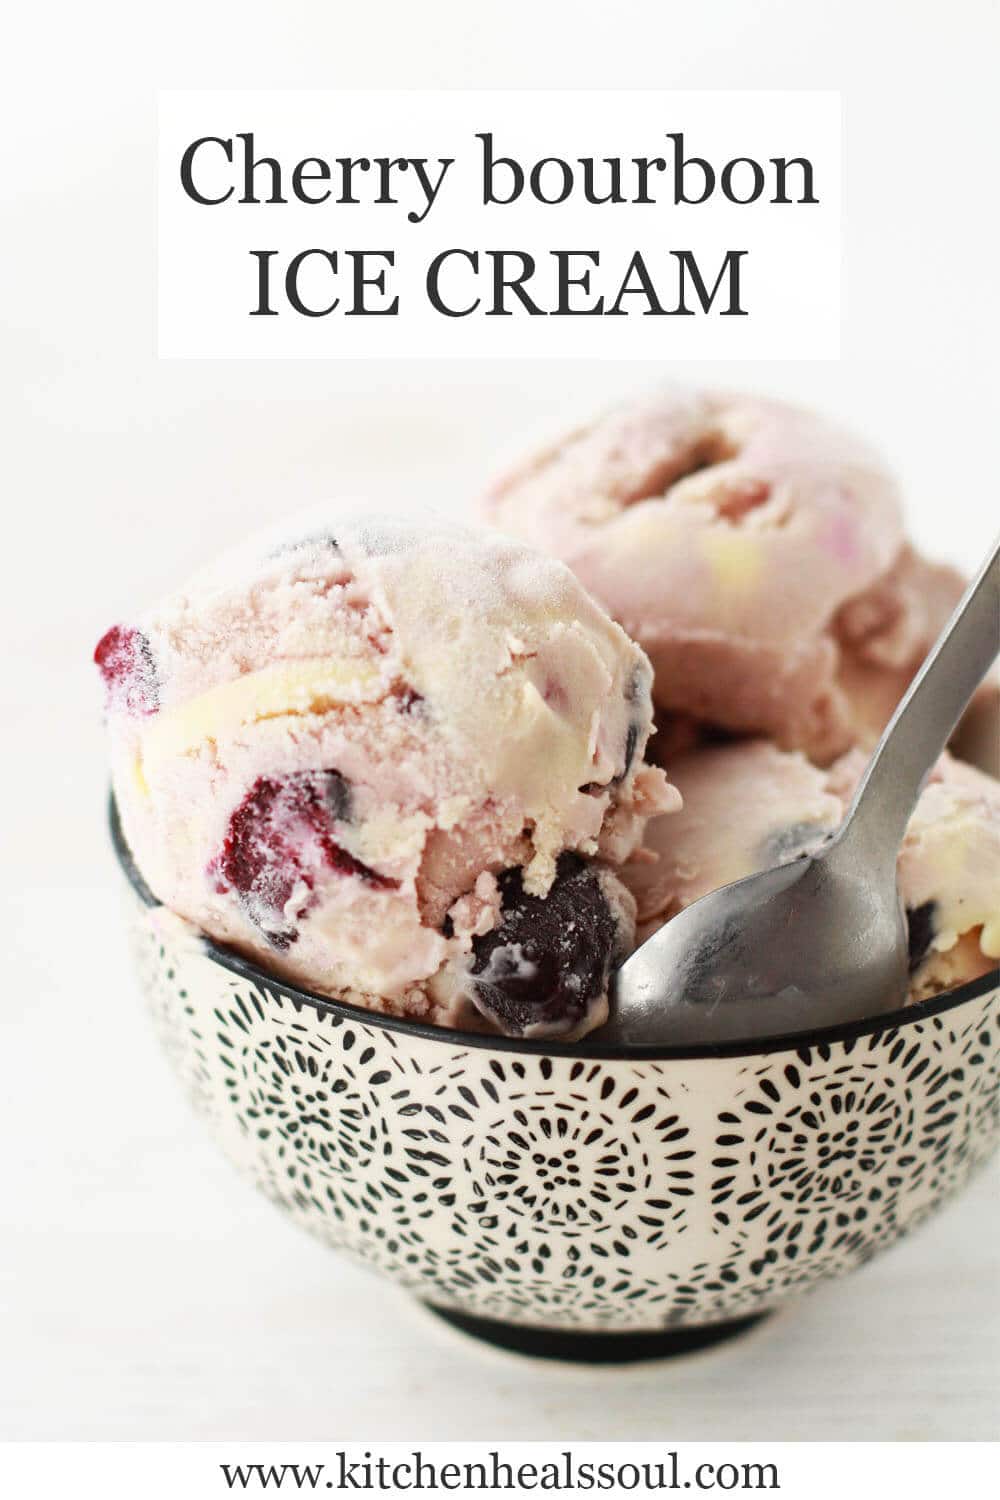 Cherry bourbon ice cream scooped in a black and white bowl and served with a spoon